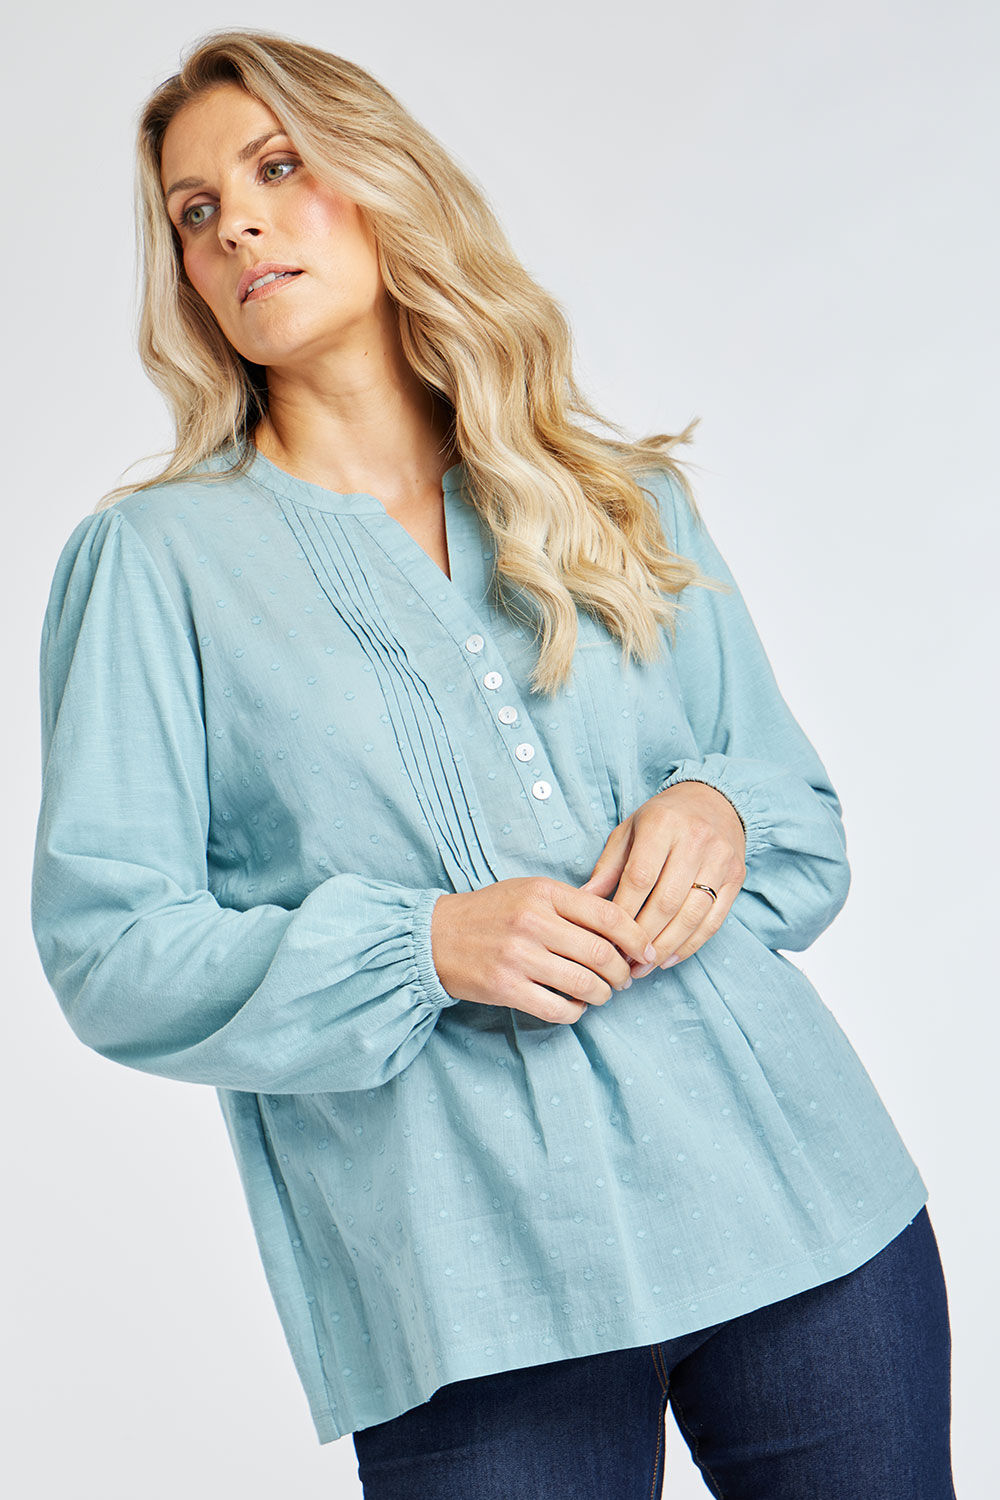 Bonmarche Women’s Blue Cotton Dobby Woven 3/4 Sleeve Front Style Pintuck Blouse, Size: 14